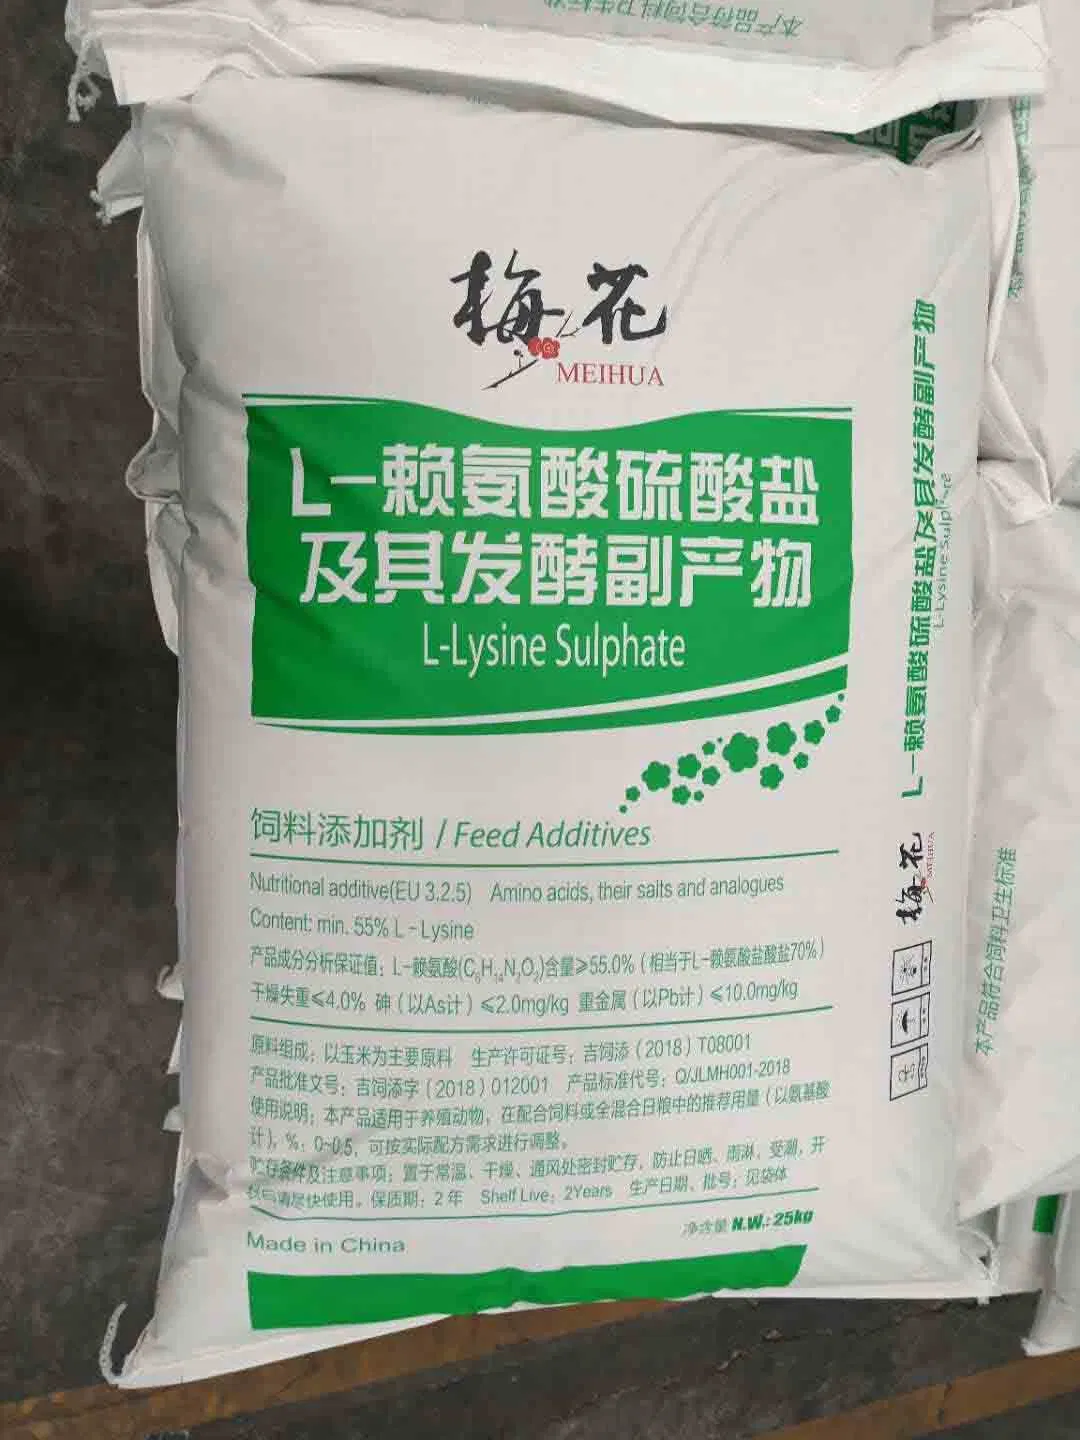 Animal Nutrition L-Lysine Sulphate 70% for Feed Additives